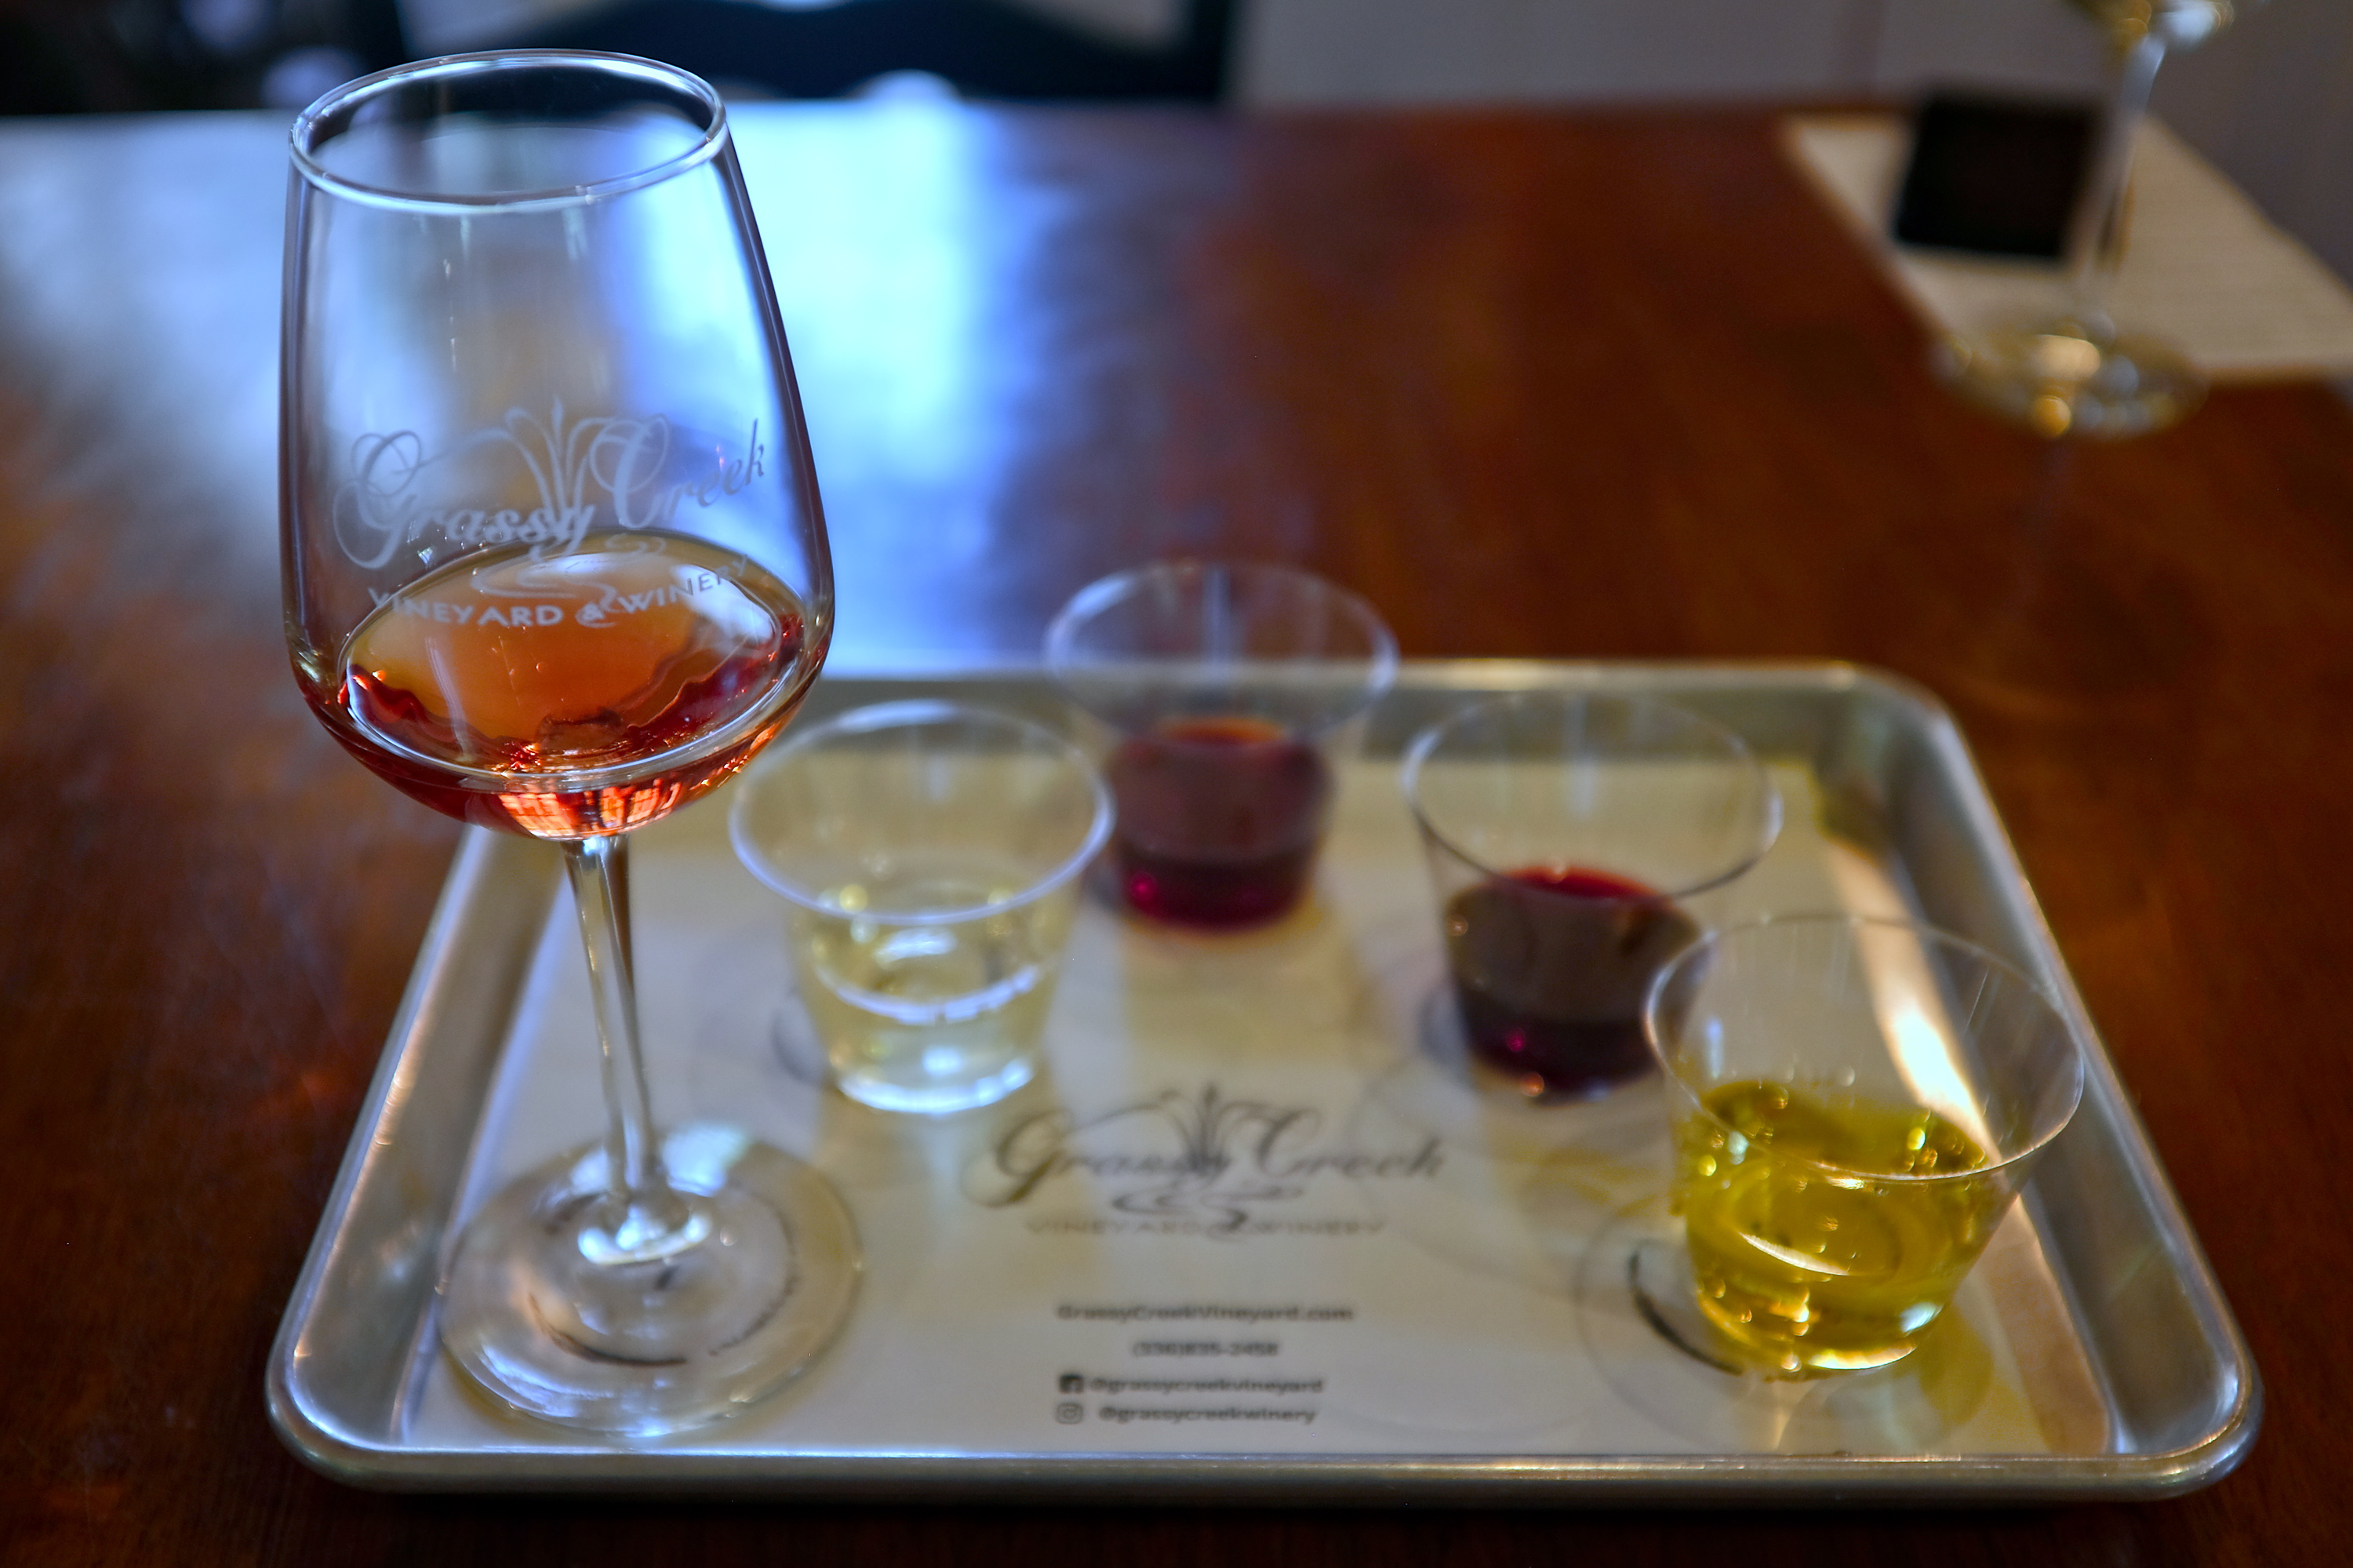 A tasting from Grassy Creek Winery